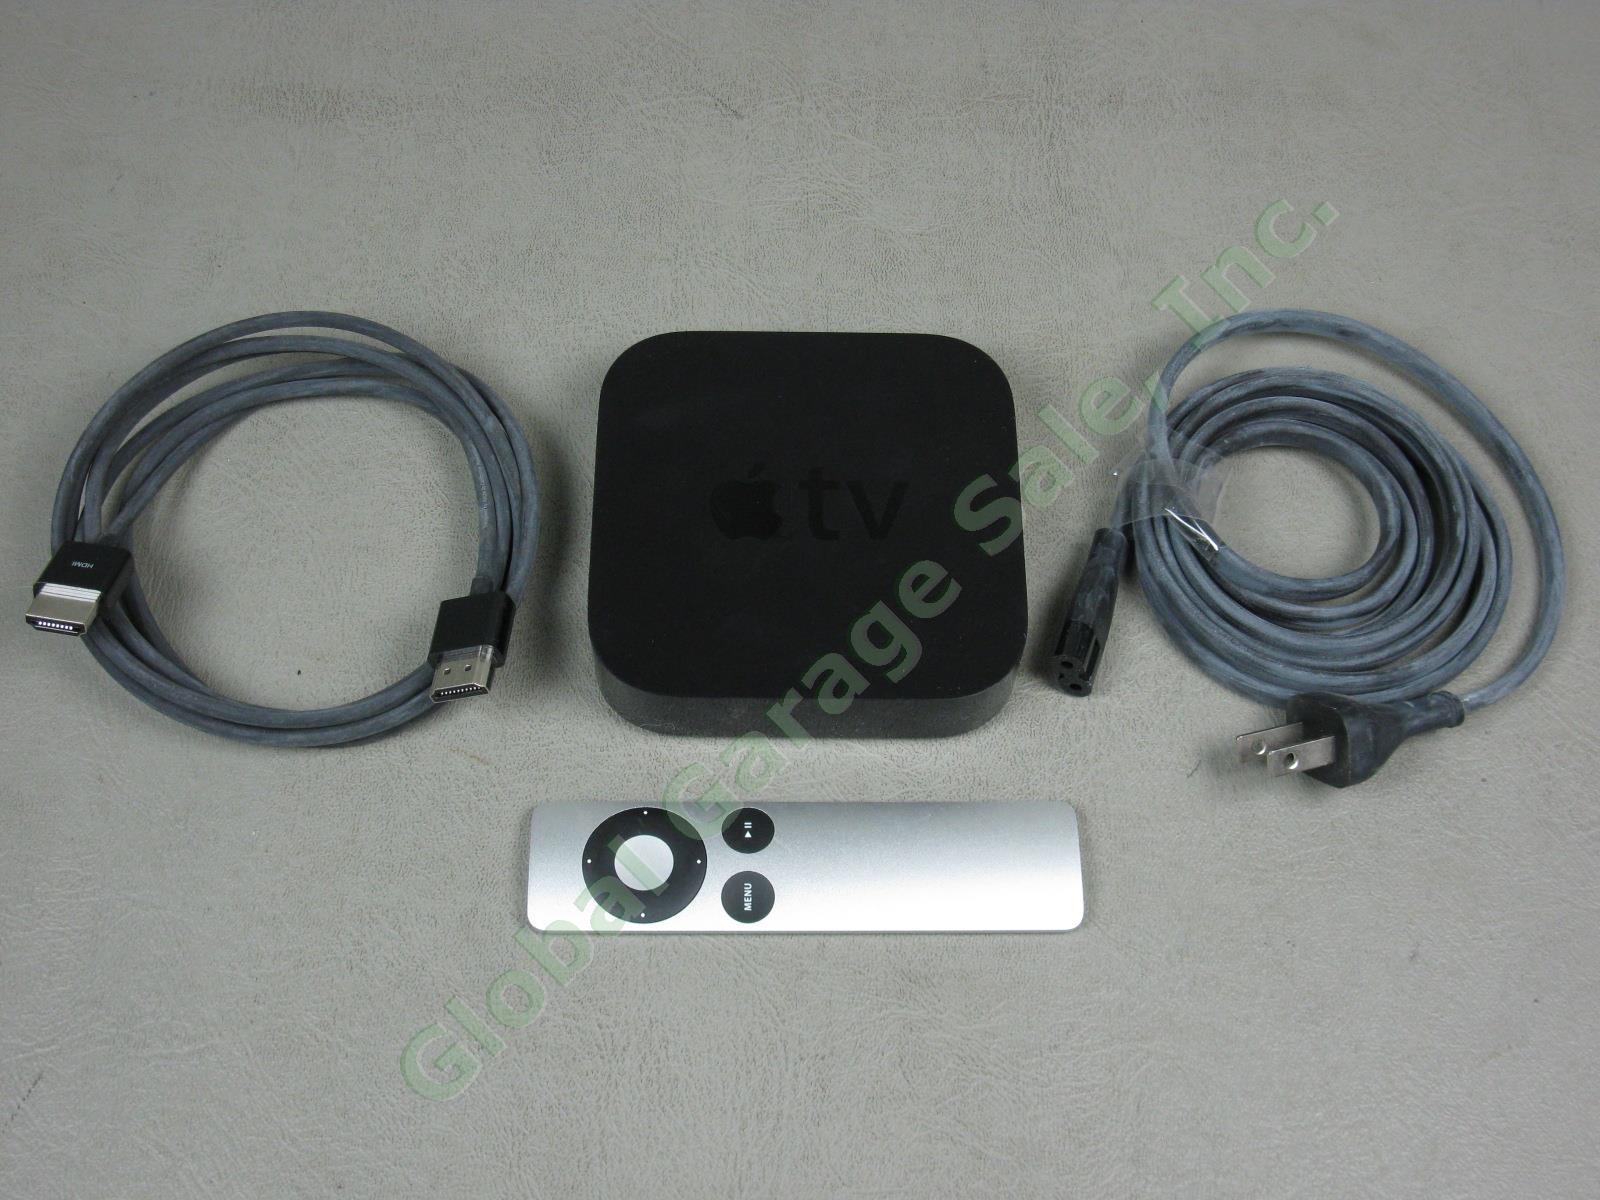 Apple TV 1080p Model A1469 3rd Gen Generation MD199LL/A One Owner w/ Remote NR!